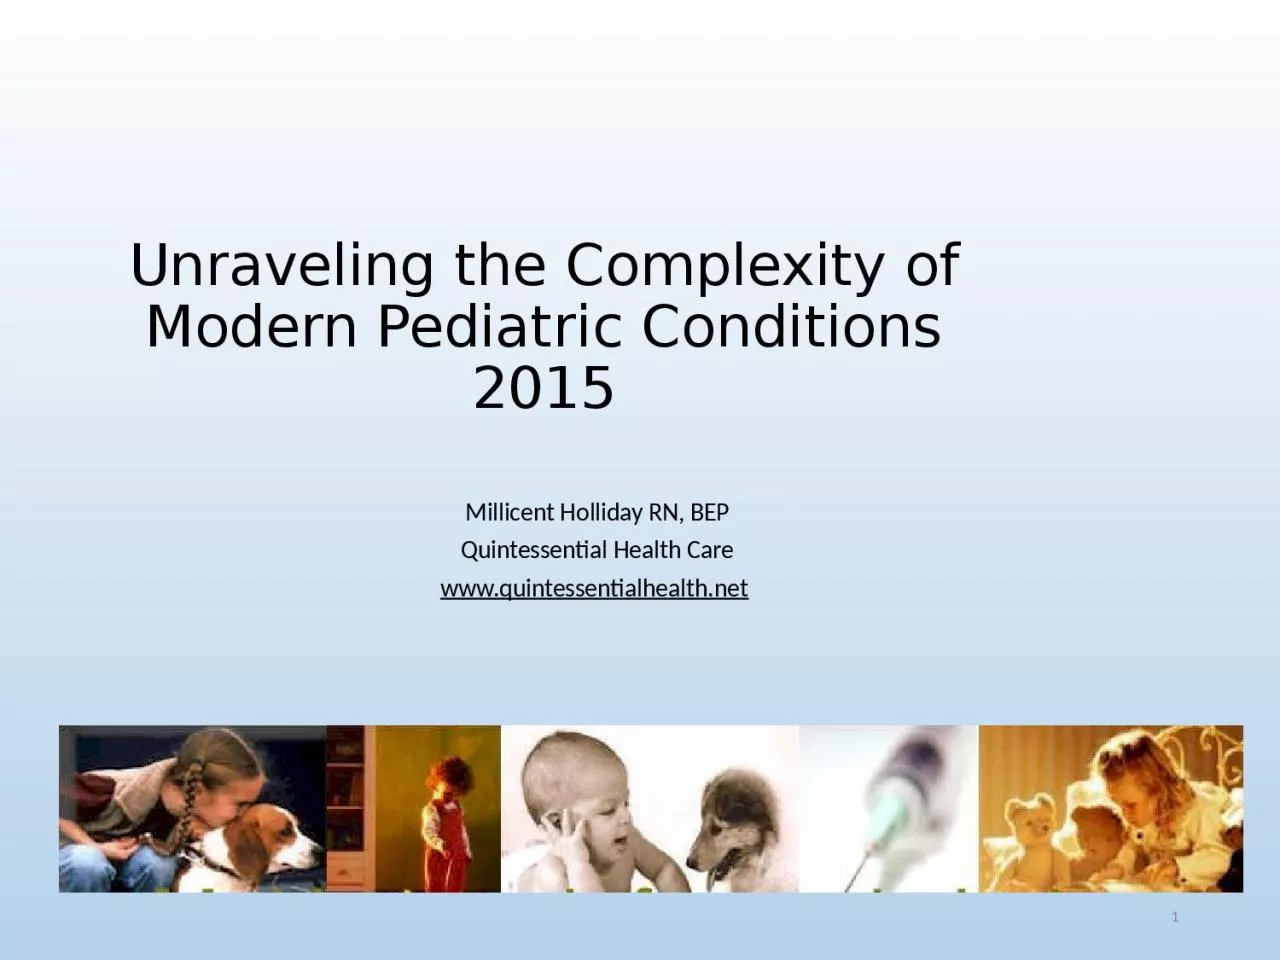 Unraveling the Complexity of Modern Pediatric Conditions